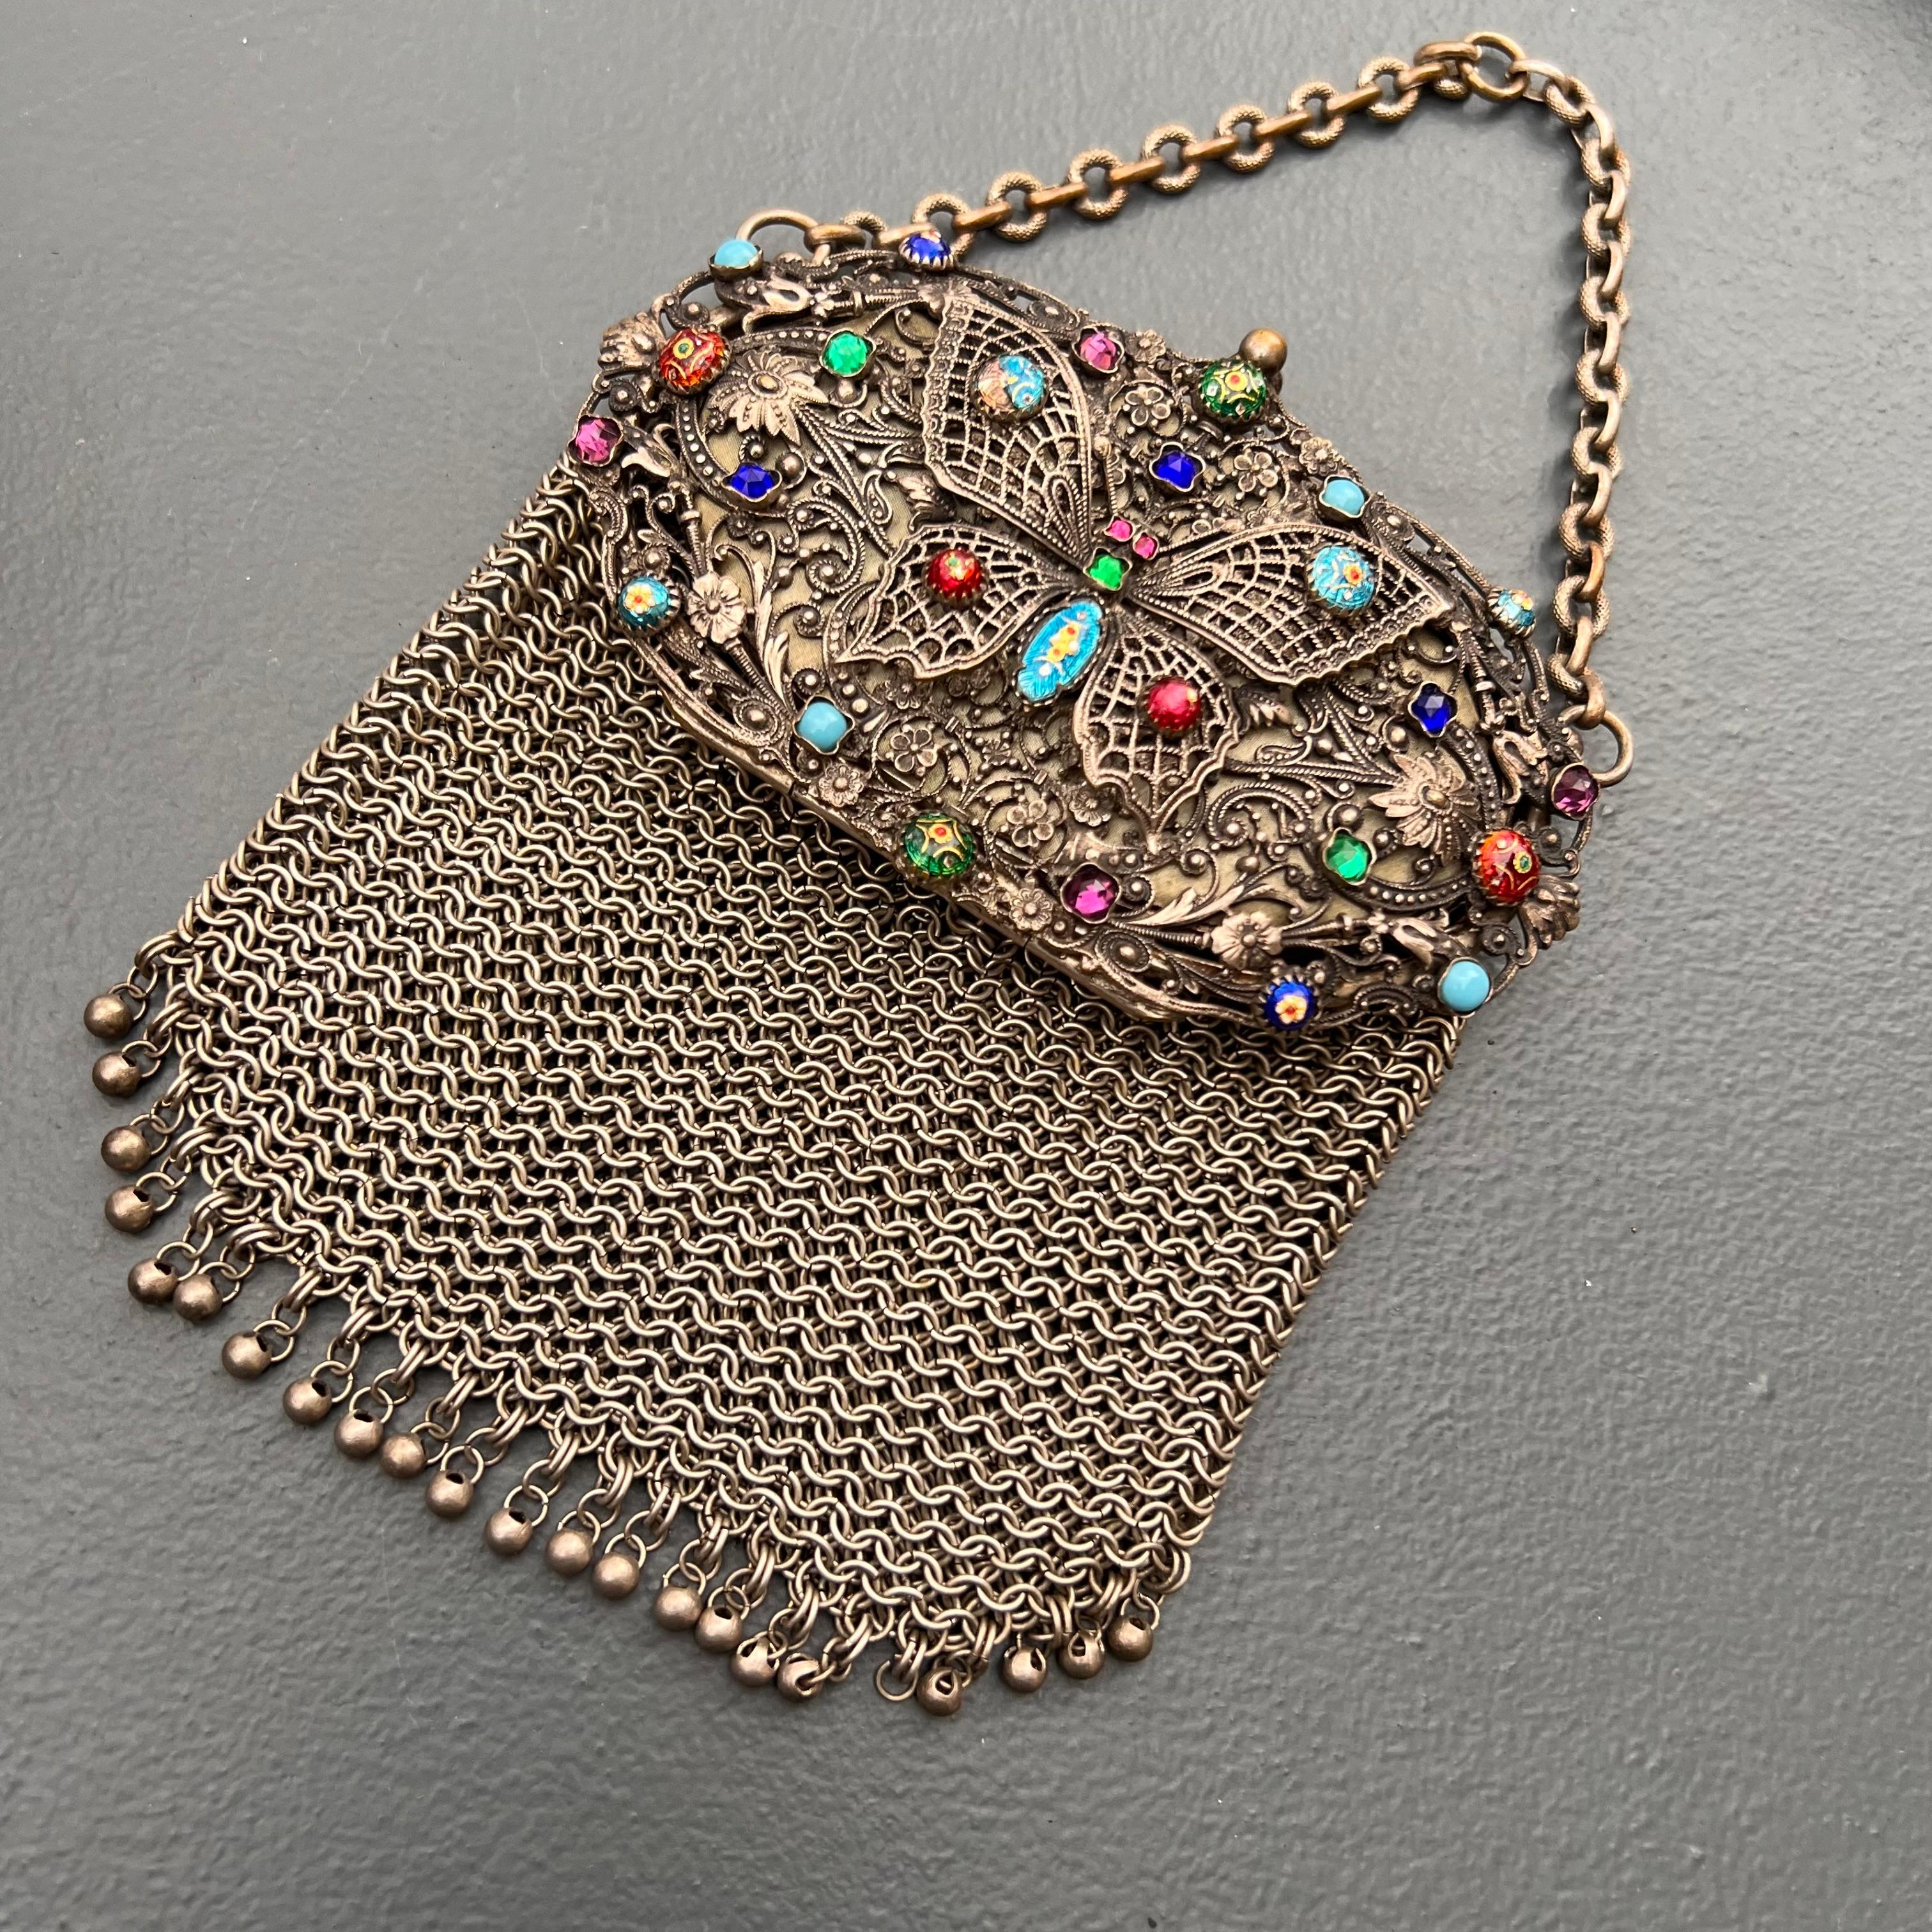 Rare very collectible antique Antique French silver tone with Bresse Enamel Butterfly chatelaine Mesh coin purse featuring  applied filigree panela and enamel cabs on top .
 Bresse enamel or emaux enamel has a distinctive beauty ,it used to be done